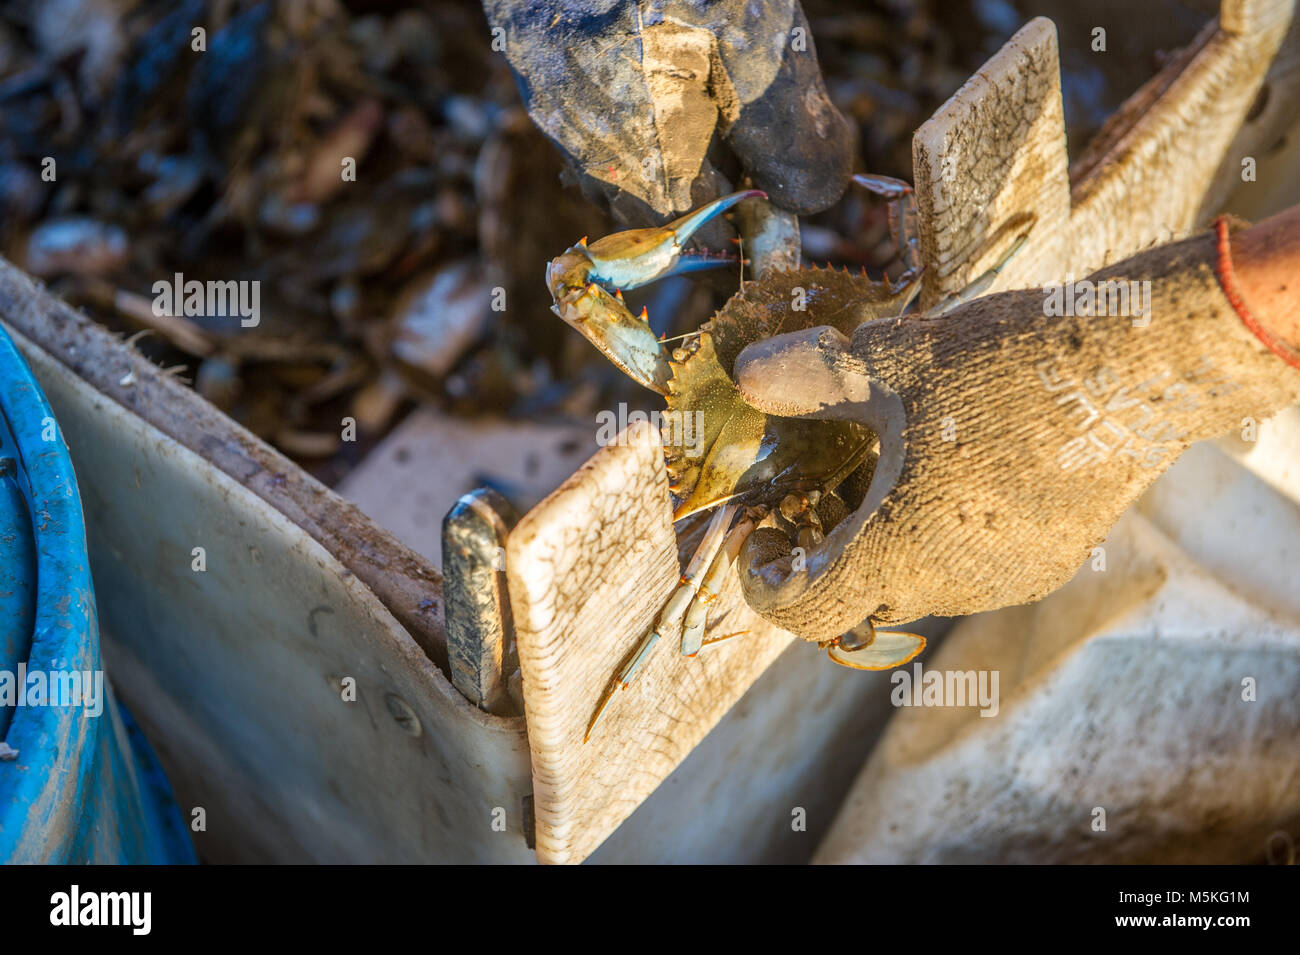 Waterman wearing work gloves uses notches on side of box to measure the size of Chesapeake blue crab, Dundalk, Maryland. Stock Photo